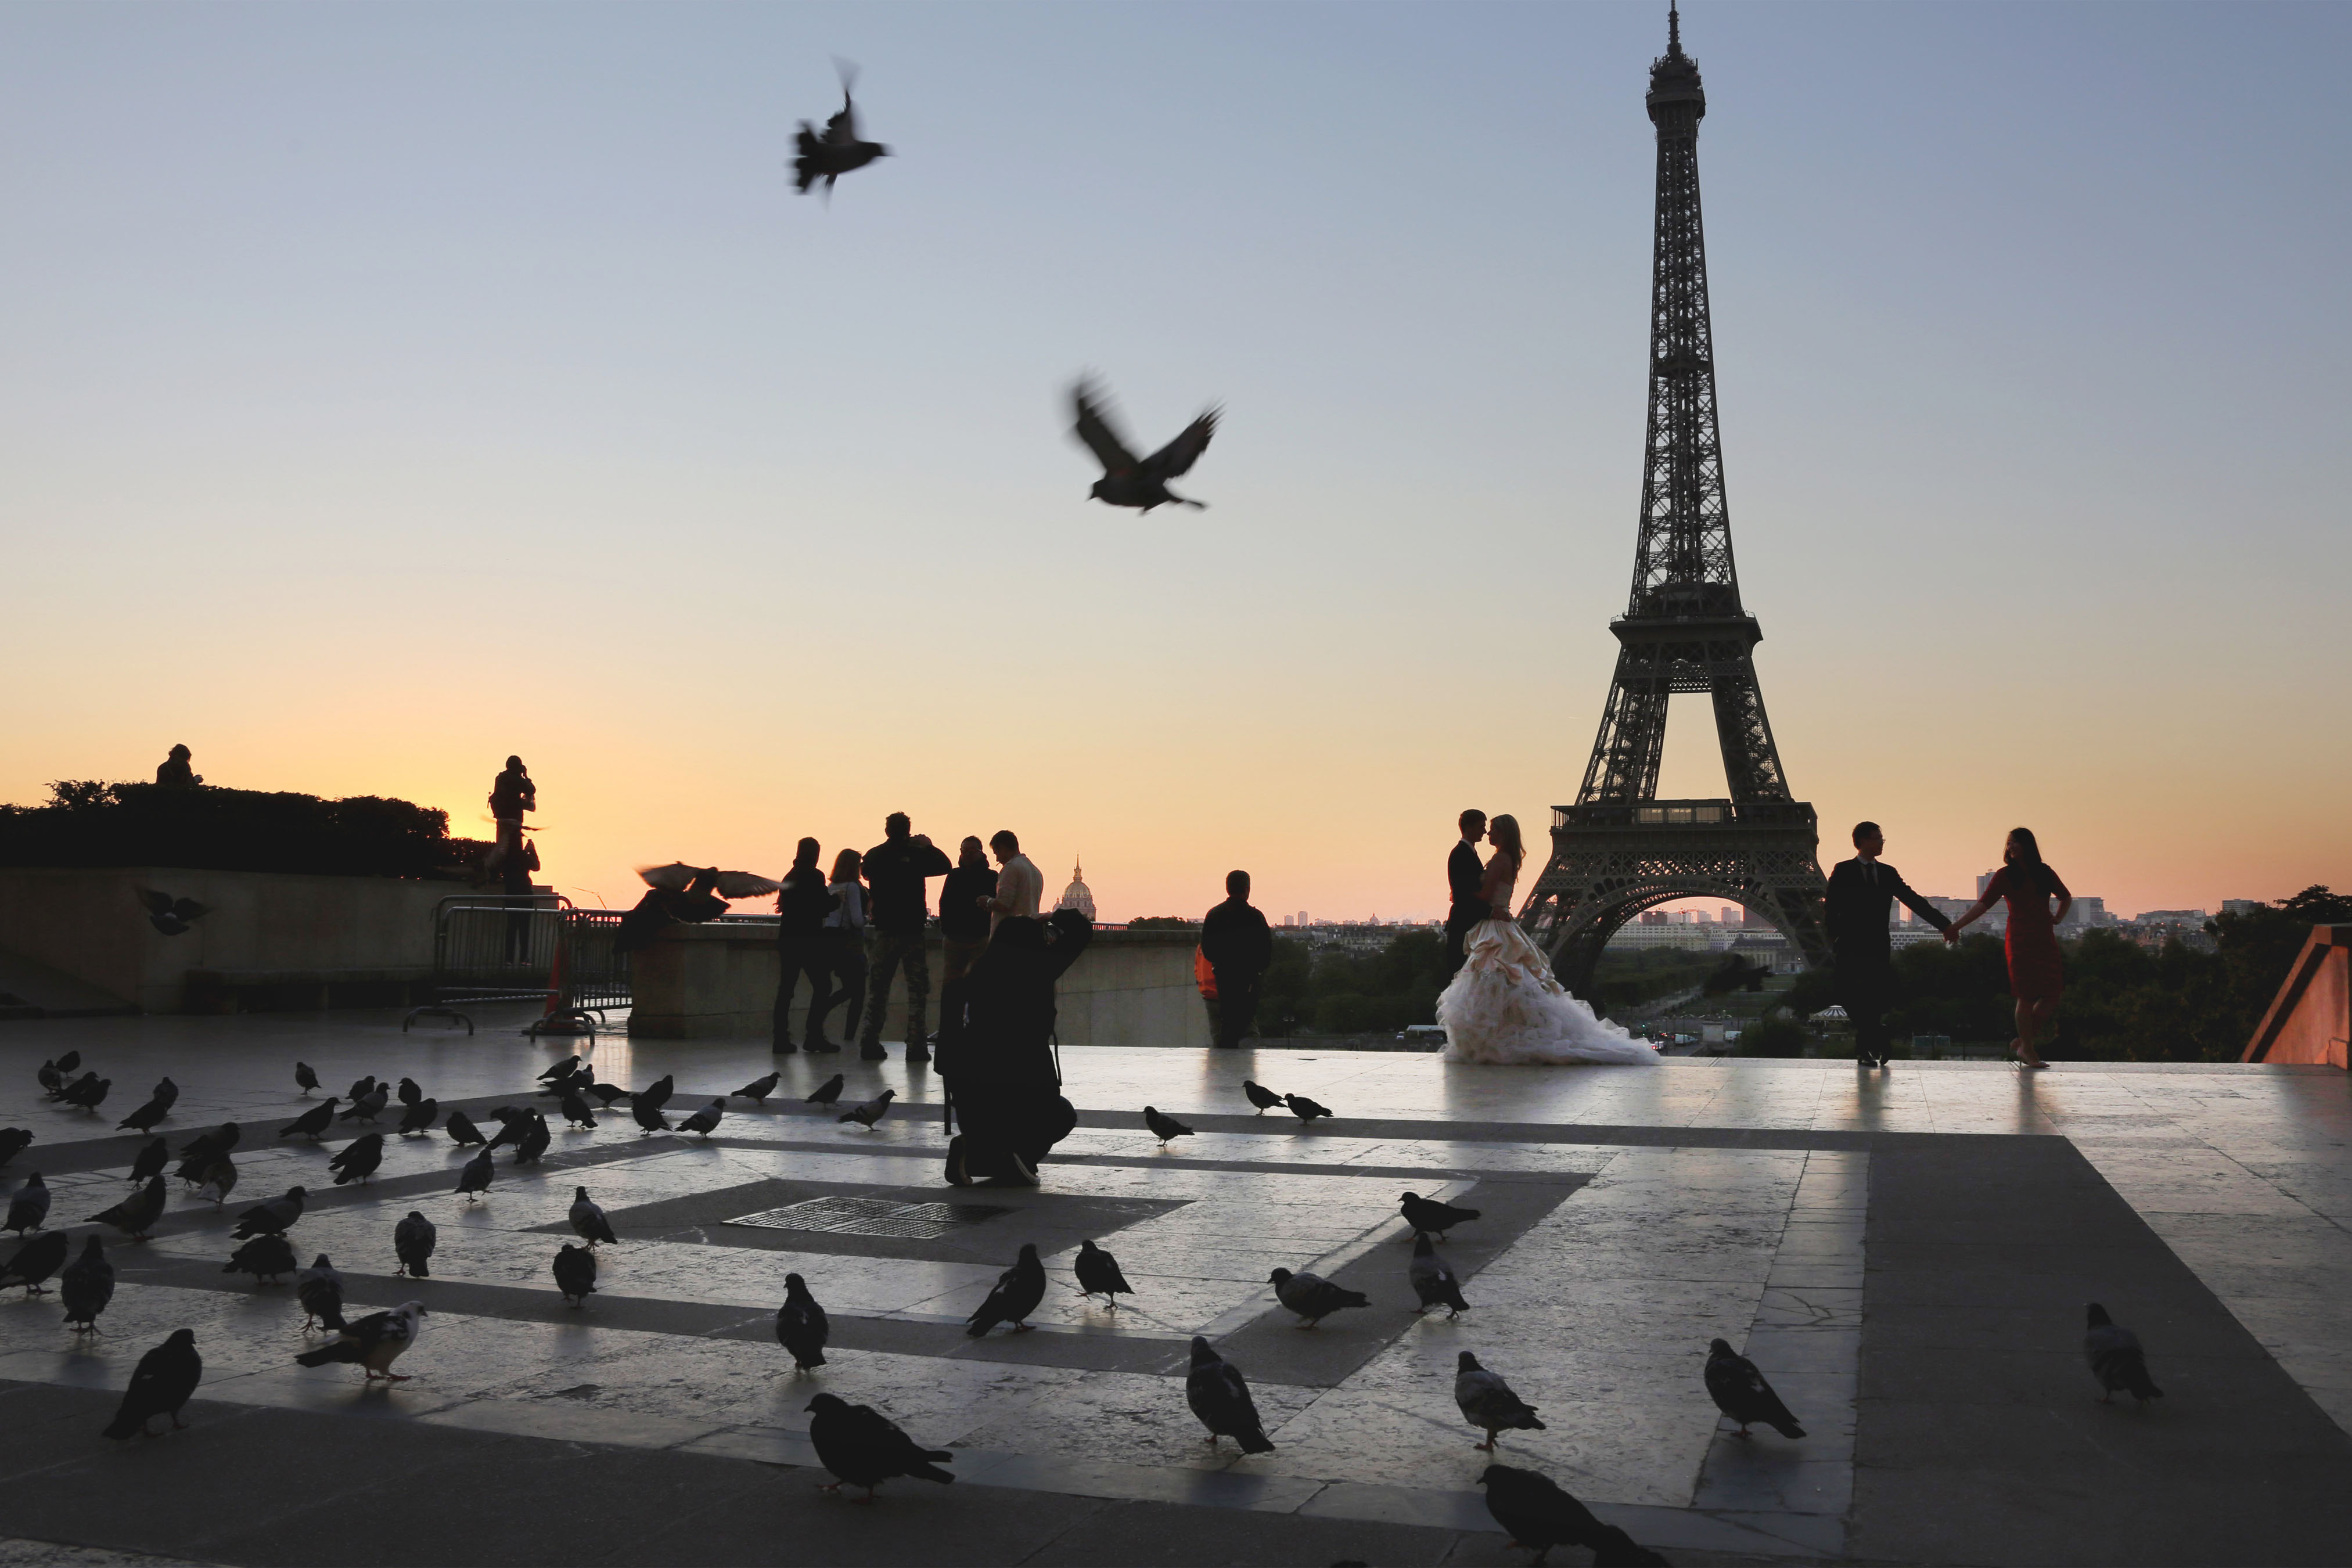 Romantic Movies Set In Paris - Experience The Magic Of Love In The City Of Lights